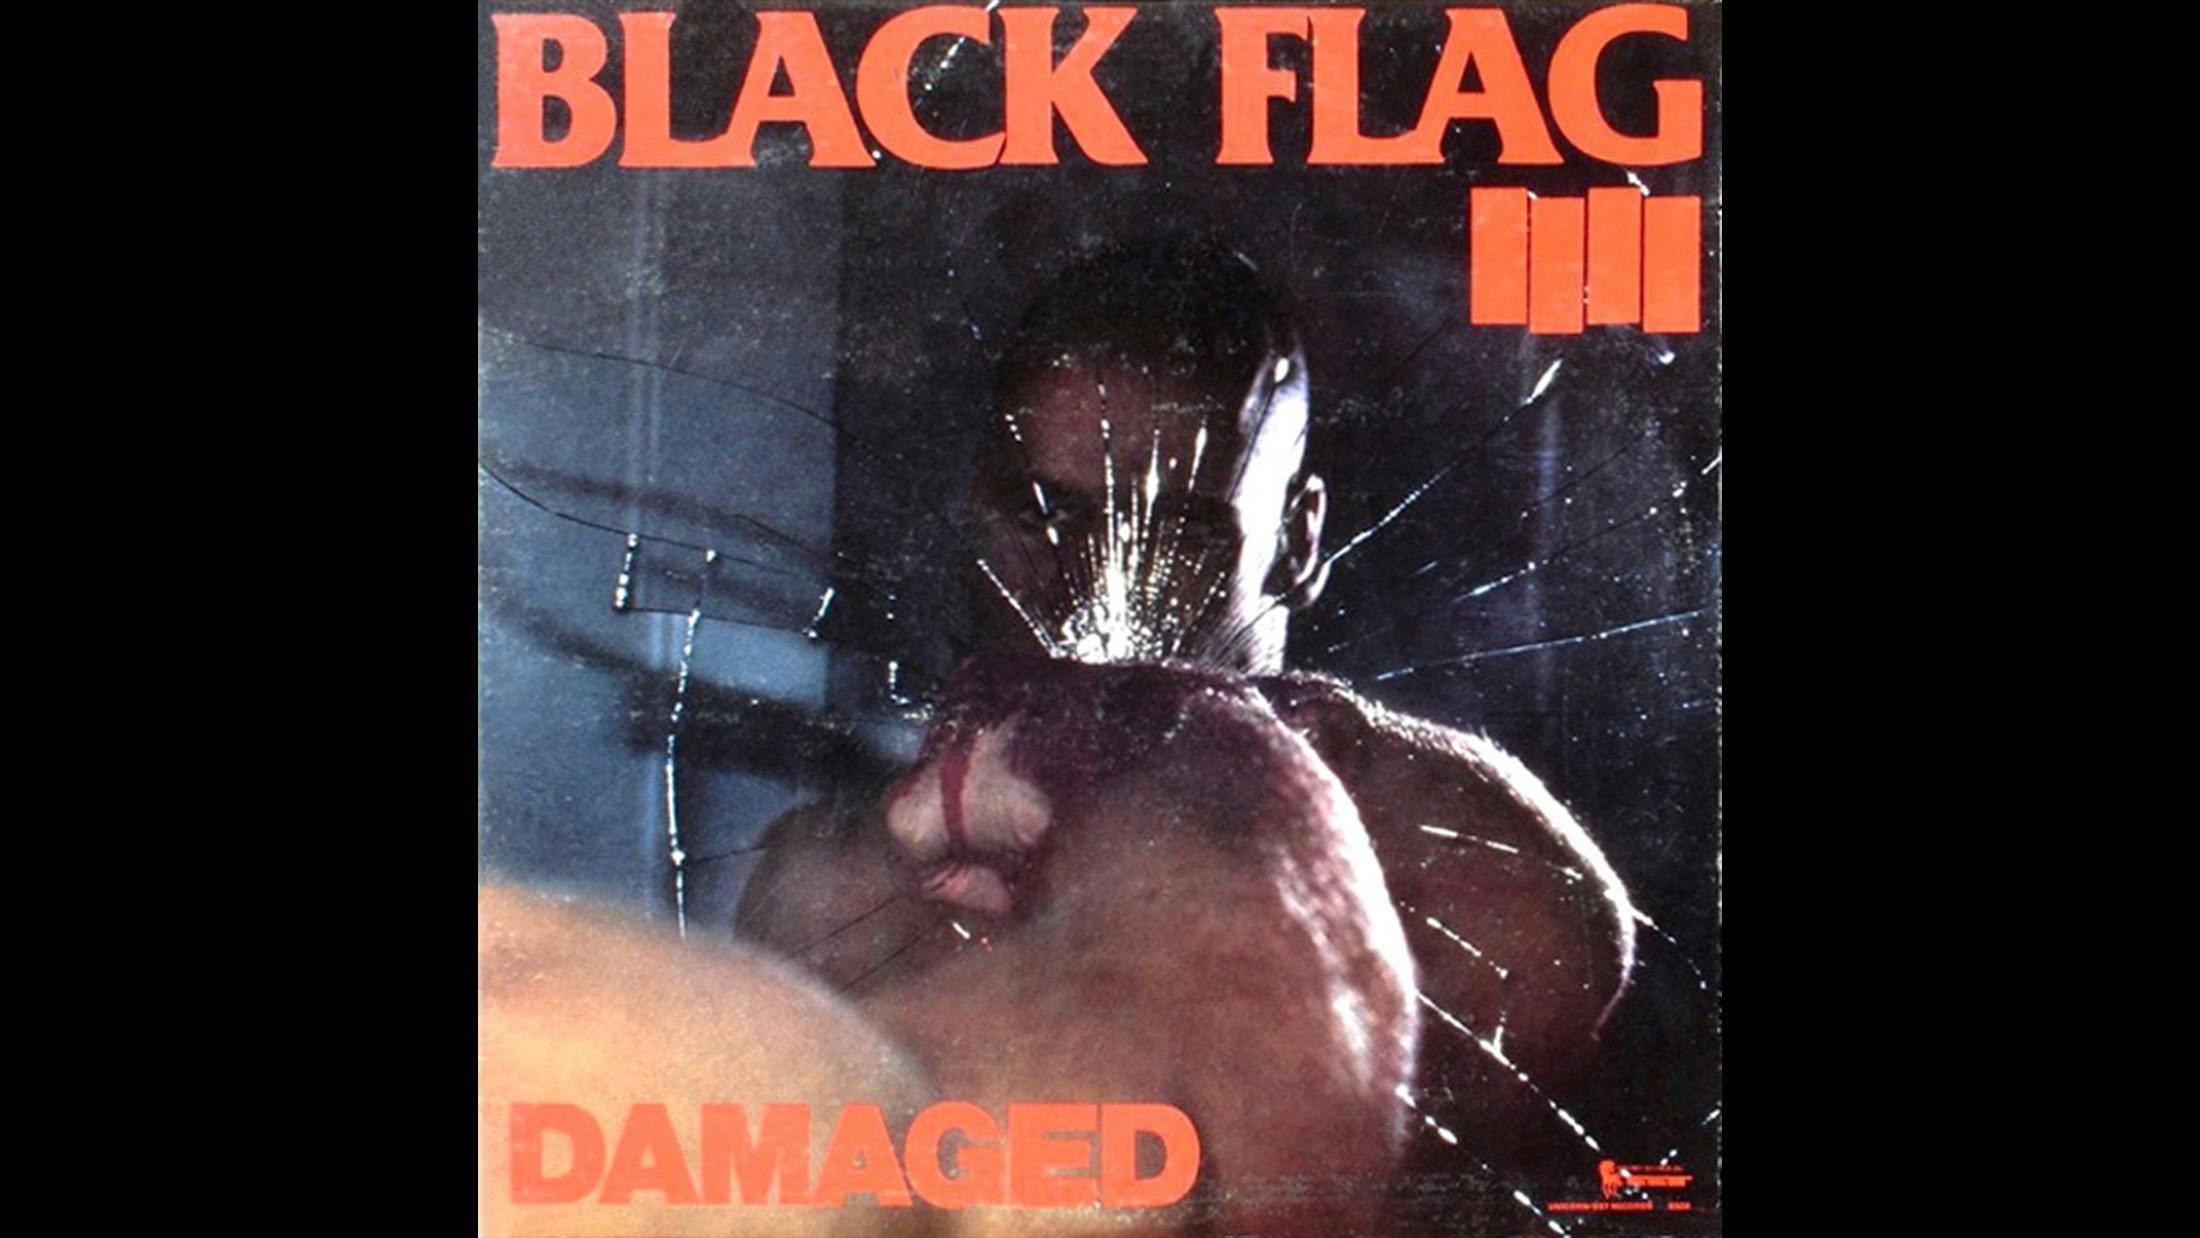 From the barely contained, 34-second bile of Spray Paint to the listless nihilism of Six Pack, and the pseudo-frat-punk of TV Party, Black Flag’s debut album is a pioneering classic of the genre, that inspired and continues to inspire legions of hardcore bands. Overcoming its DIY, roughshod recording quality with pure, punk rock fury, the West Coast crew are captured in all of their bloody, fist-flailing glory here.